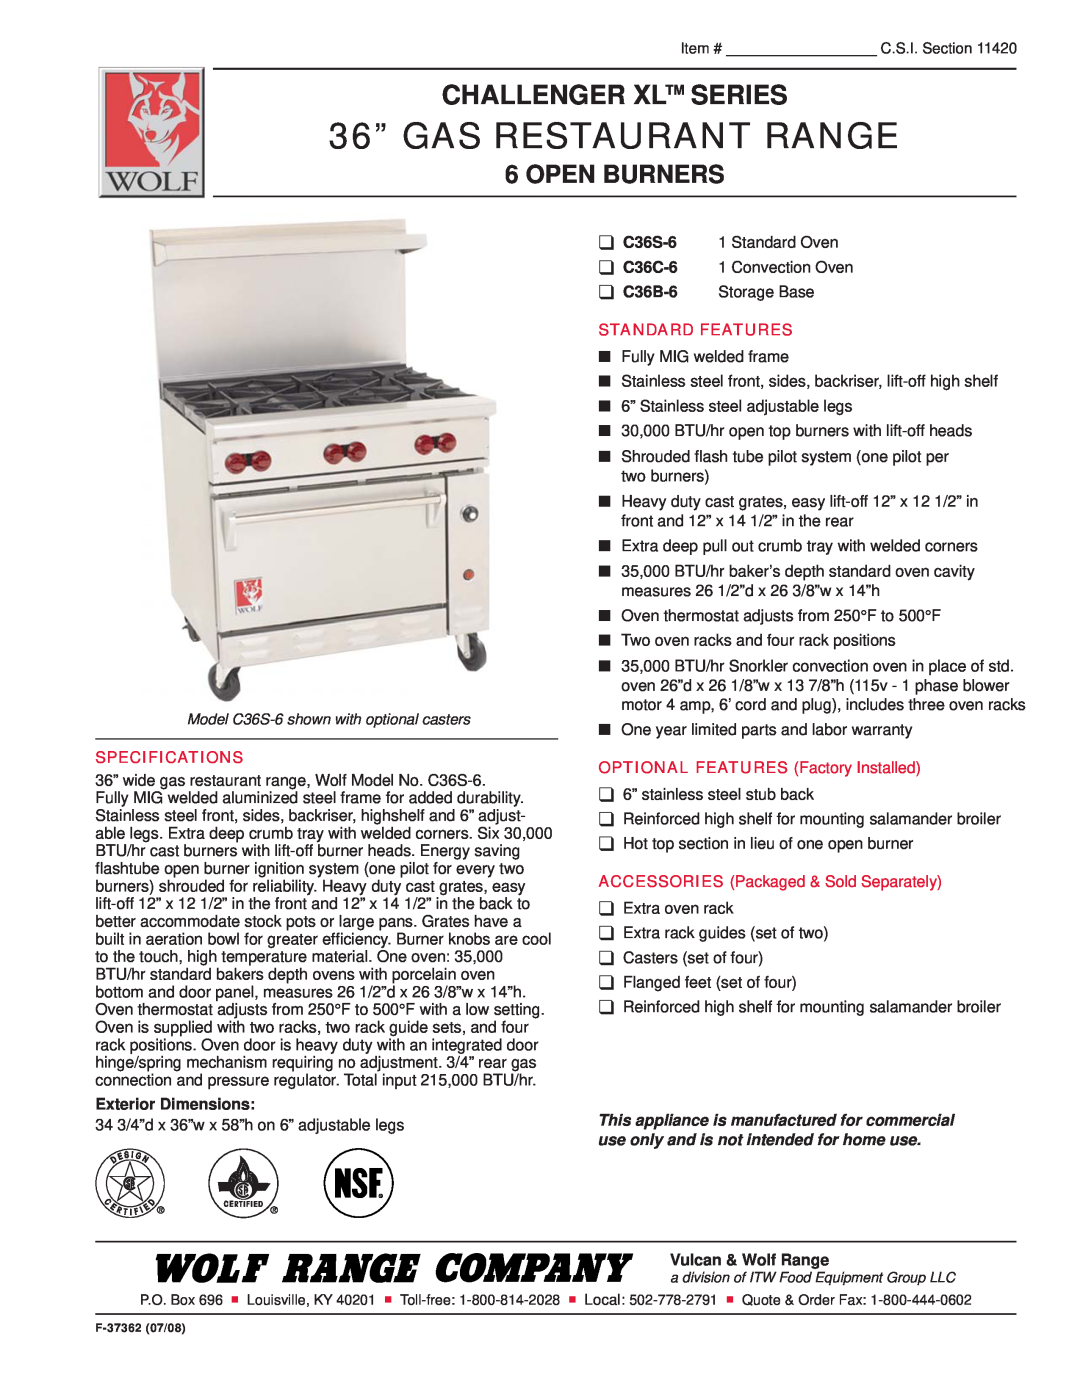 Wolf C36C-6 specifications 36” GAS RESTAURANT RANGE, Challenger Xl Series, Open Burners, Specifications, Standard Features 